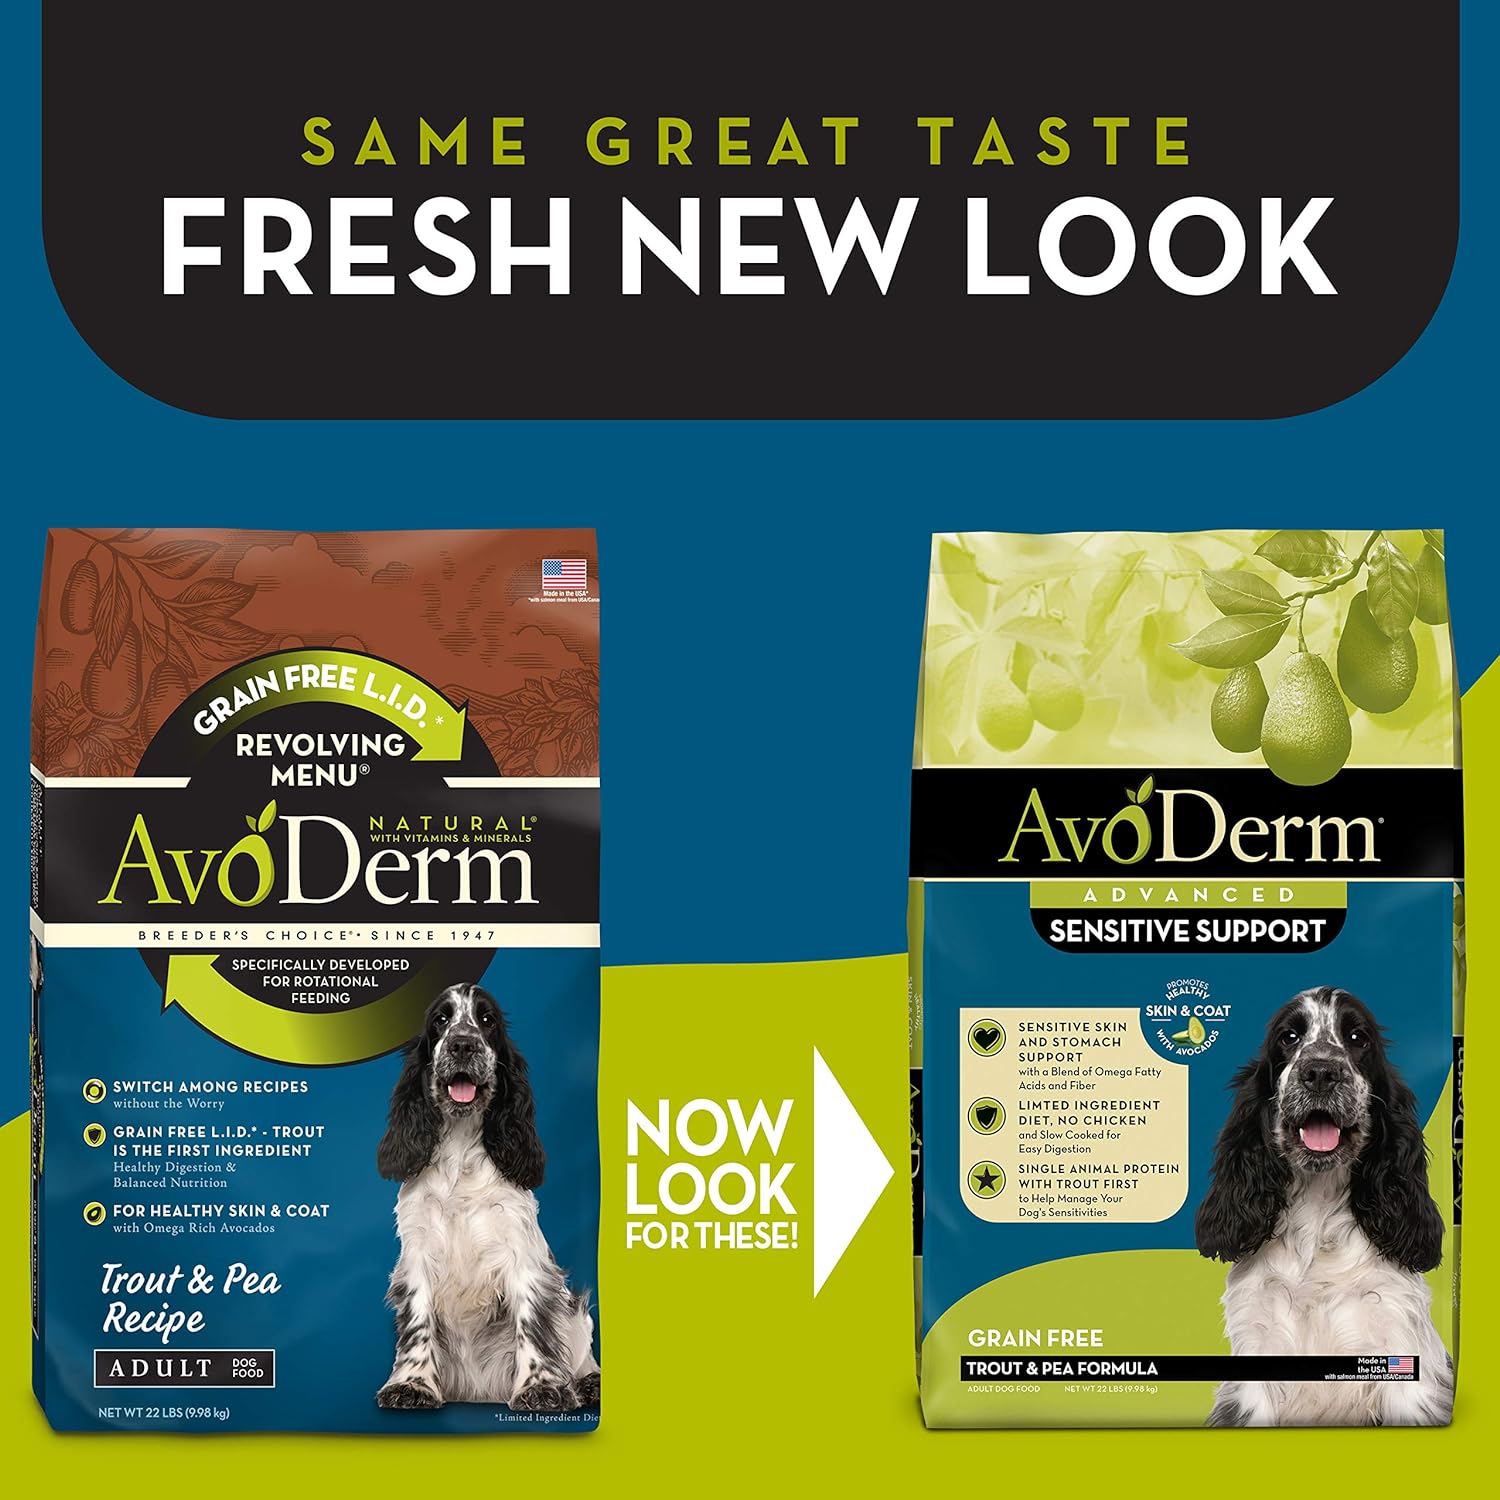 AvoDerm Advanced Sensitive Support Grain-Free Trout & Pea Formula Dry Dog Food – Gallery Image 3